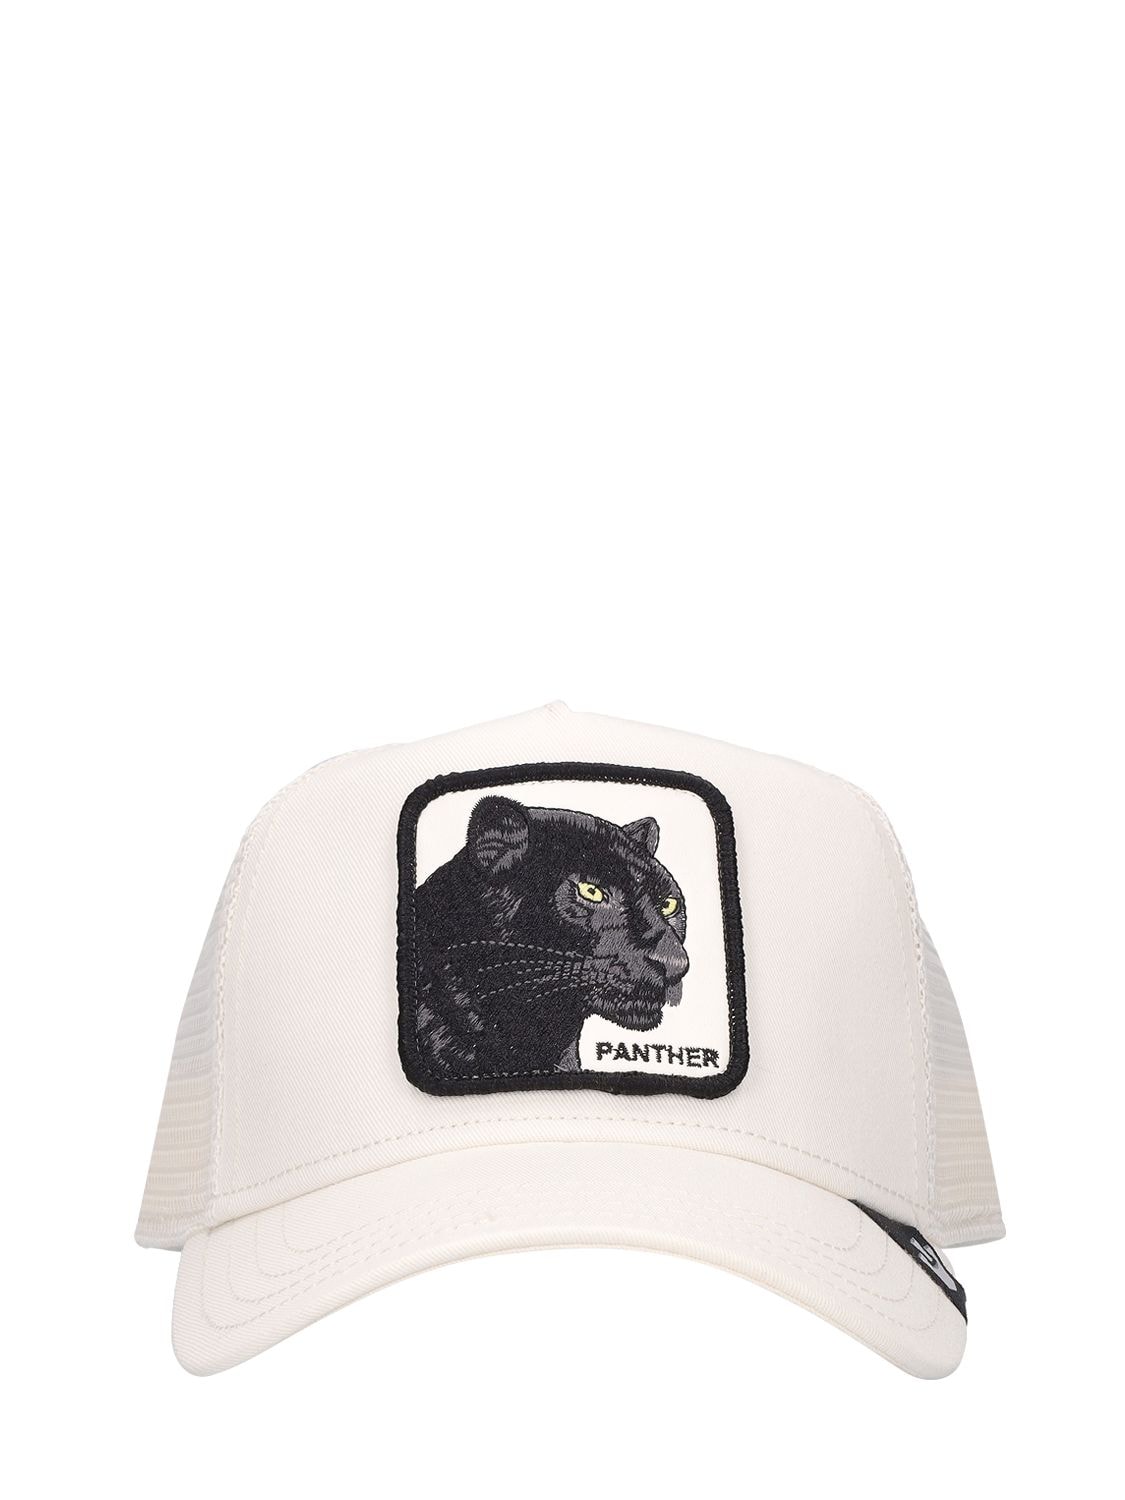 Goorin Bros The Panther Trucker Hat W/patch In White